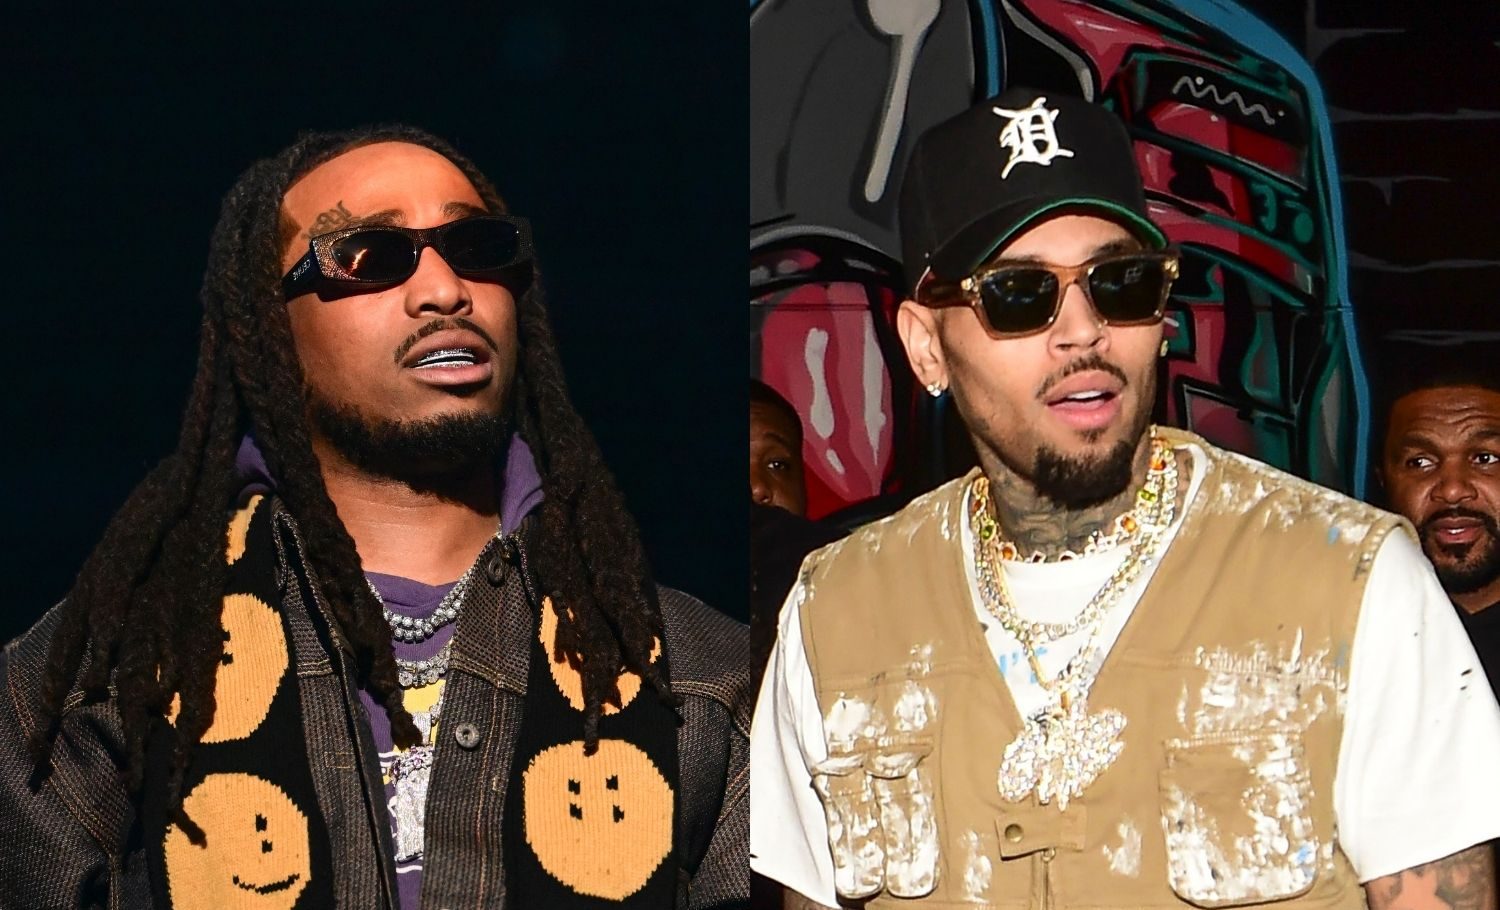 He’s Awake! Quavo Shares First Response To Chris Brown’s ‘Weakest Link’ Diss 